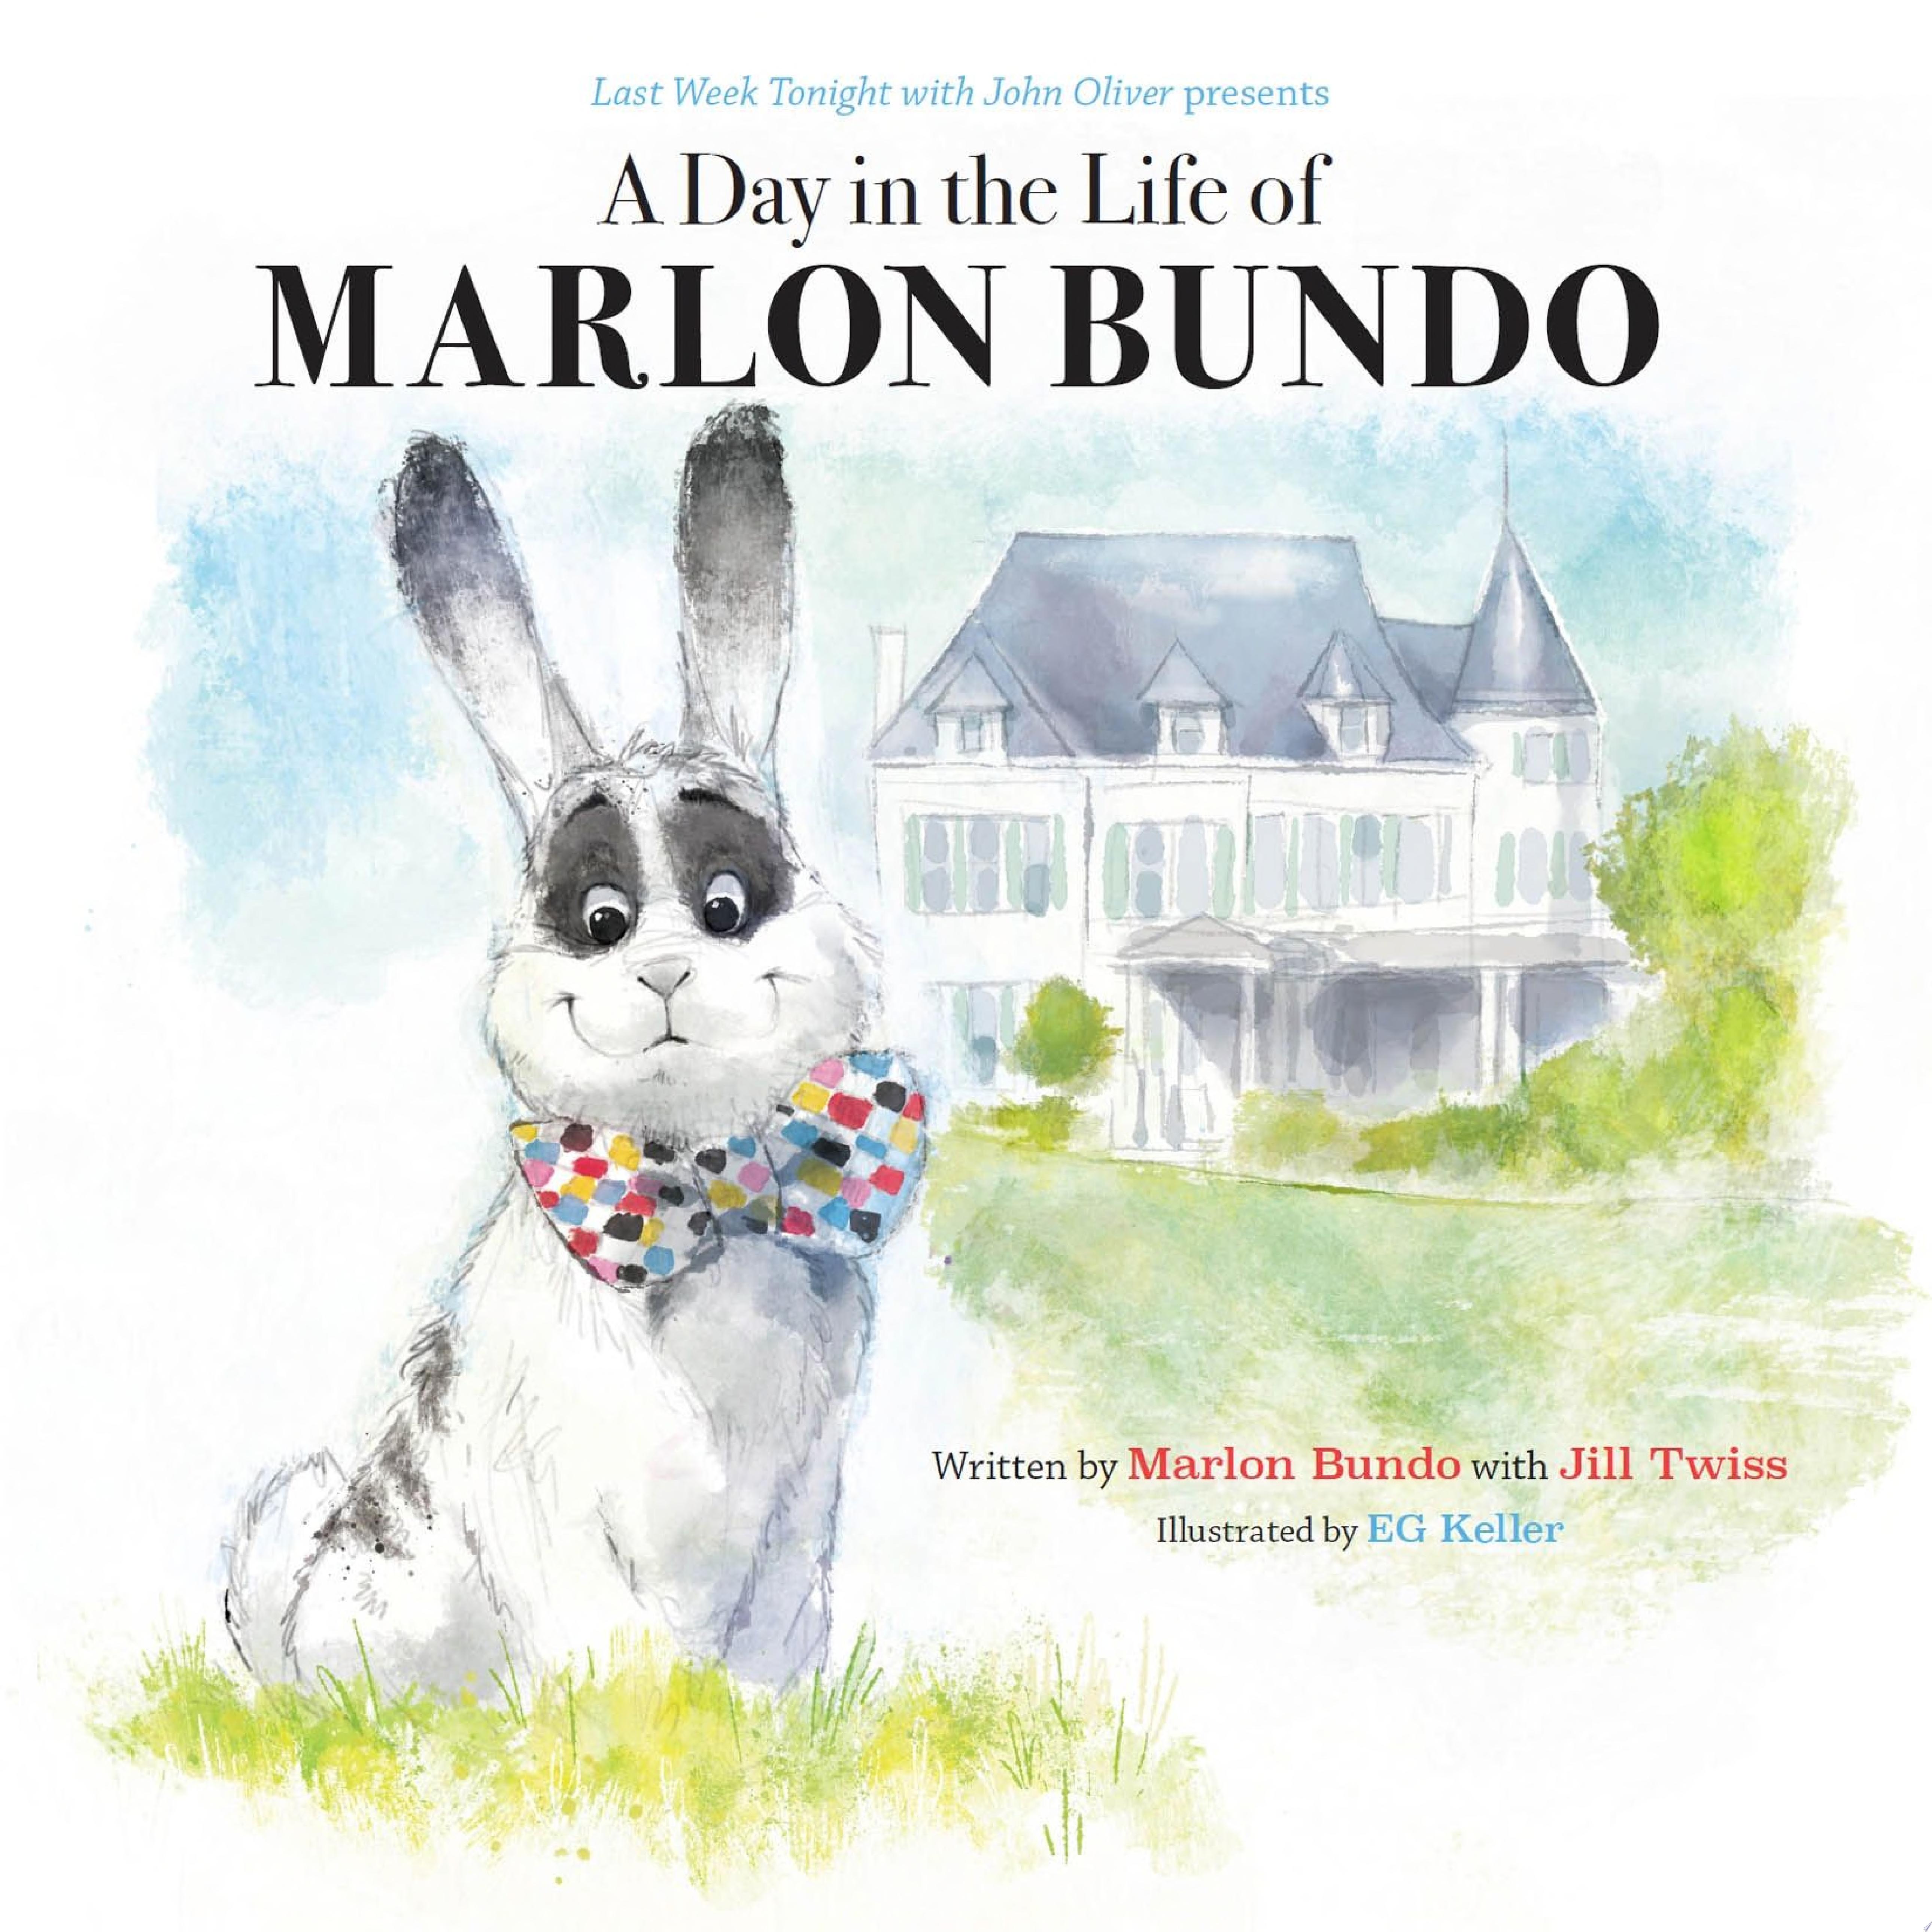 Image for "A Day in the Life of Marlon Bundo"